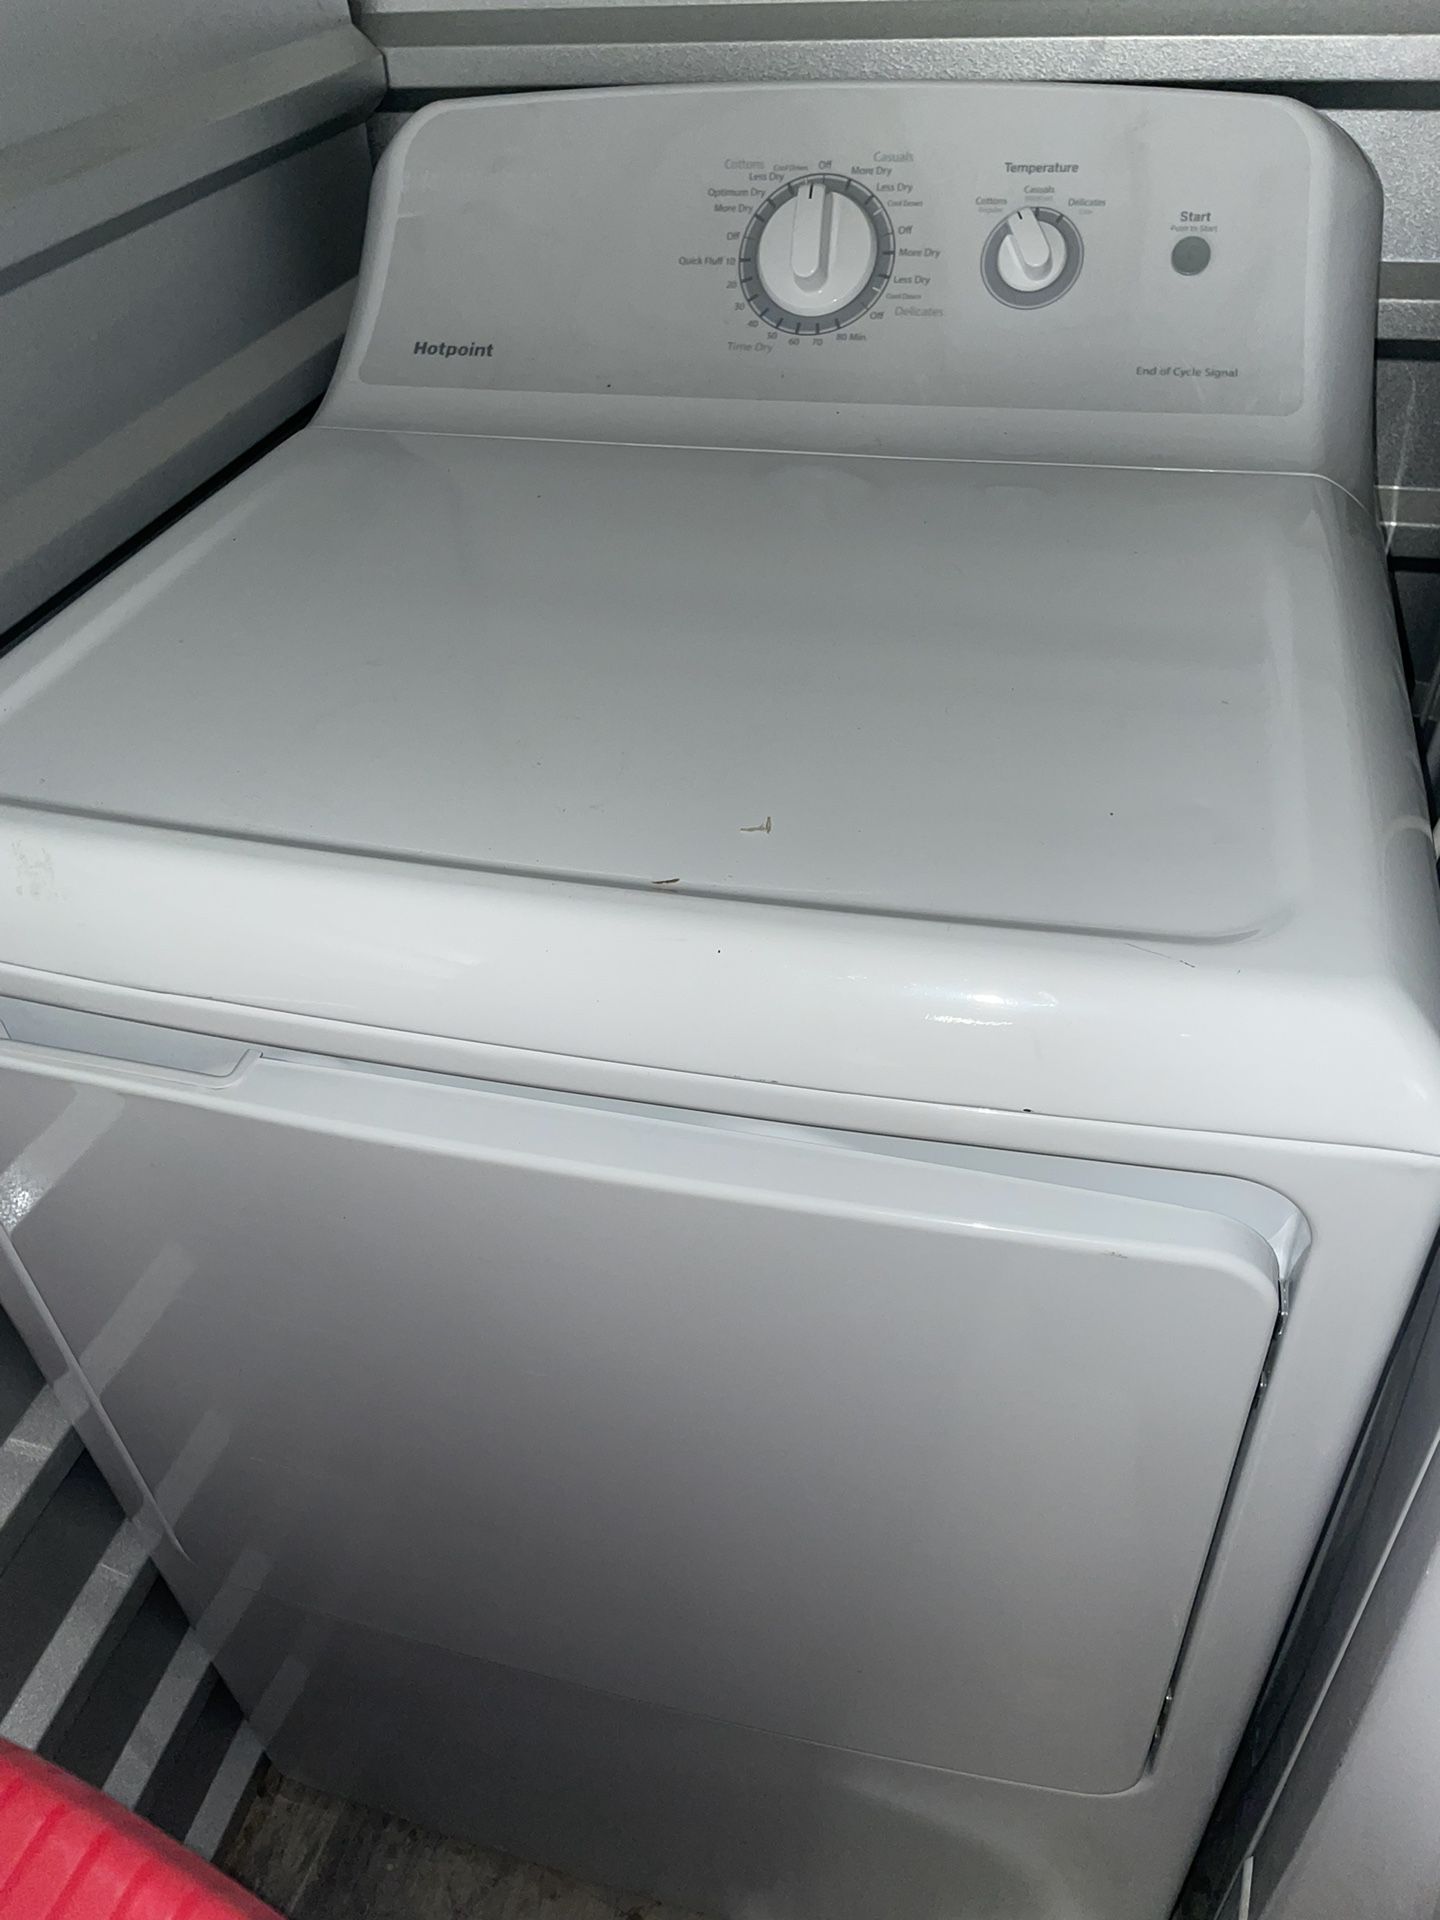 Washer And Dryer Excellent Working